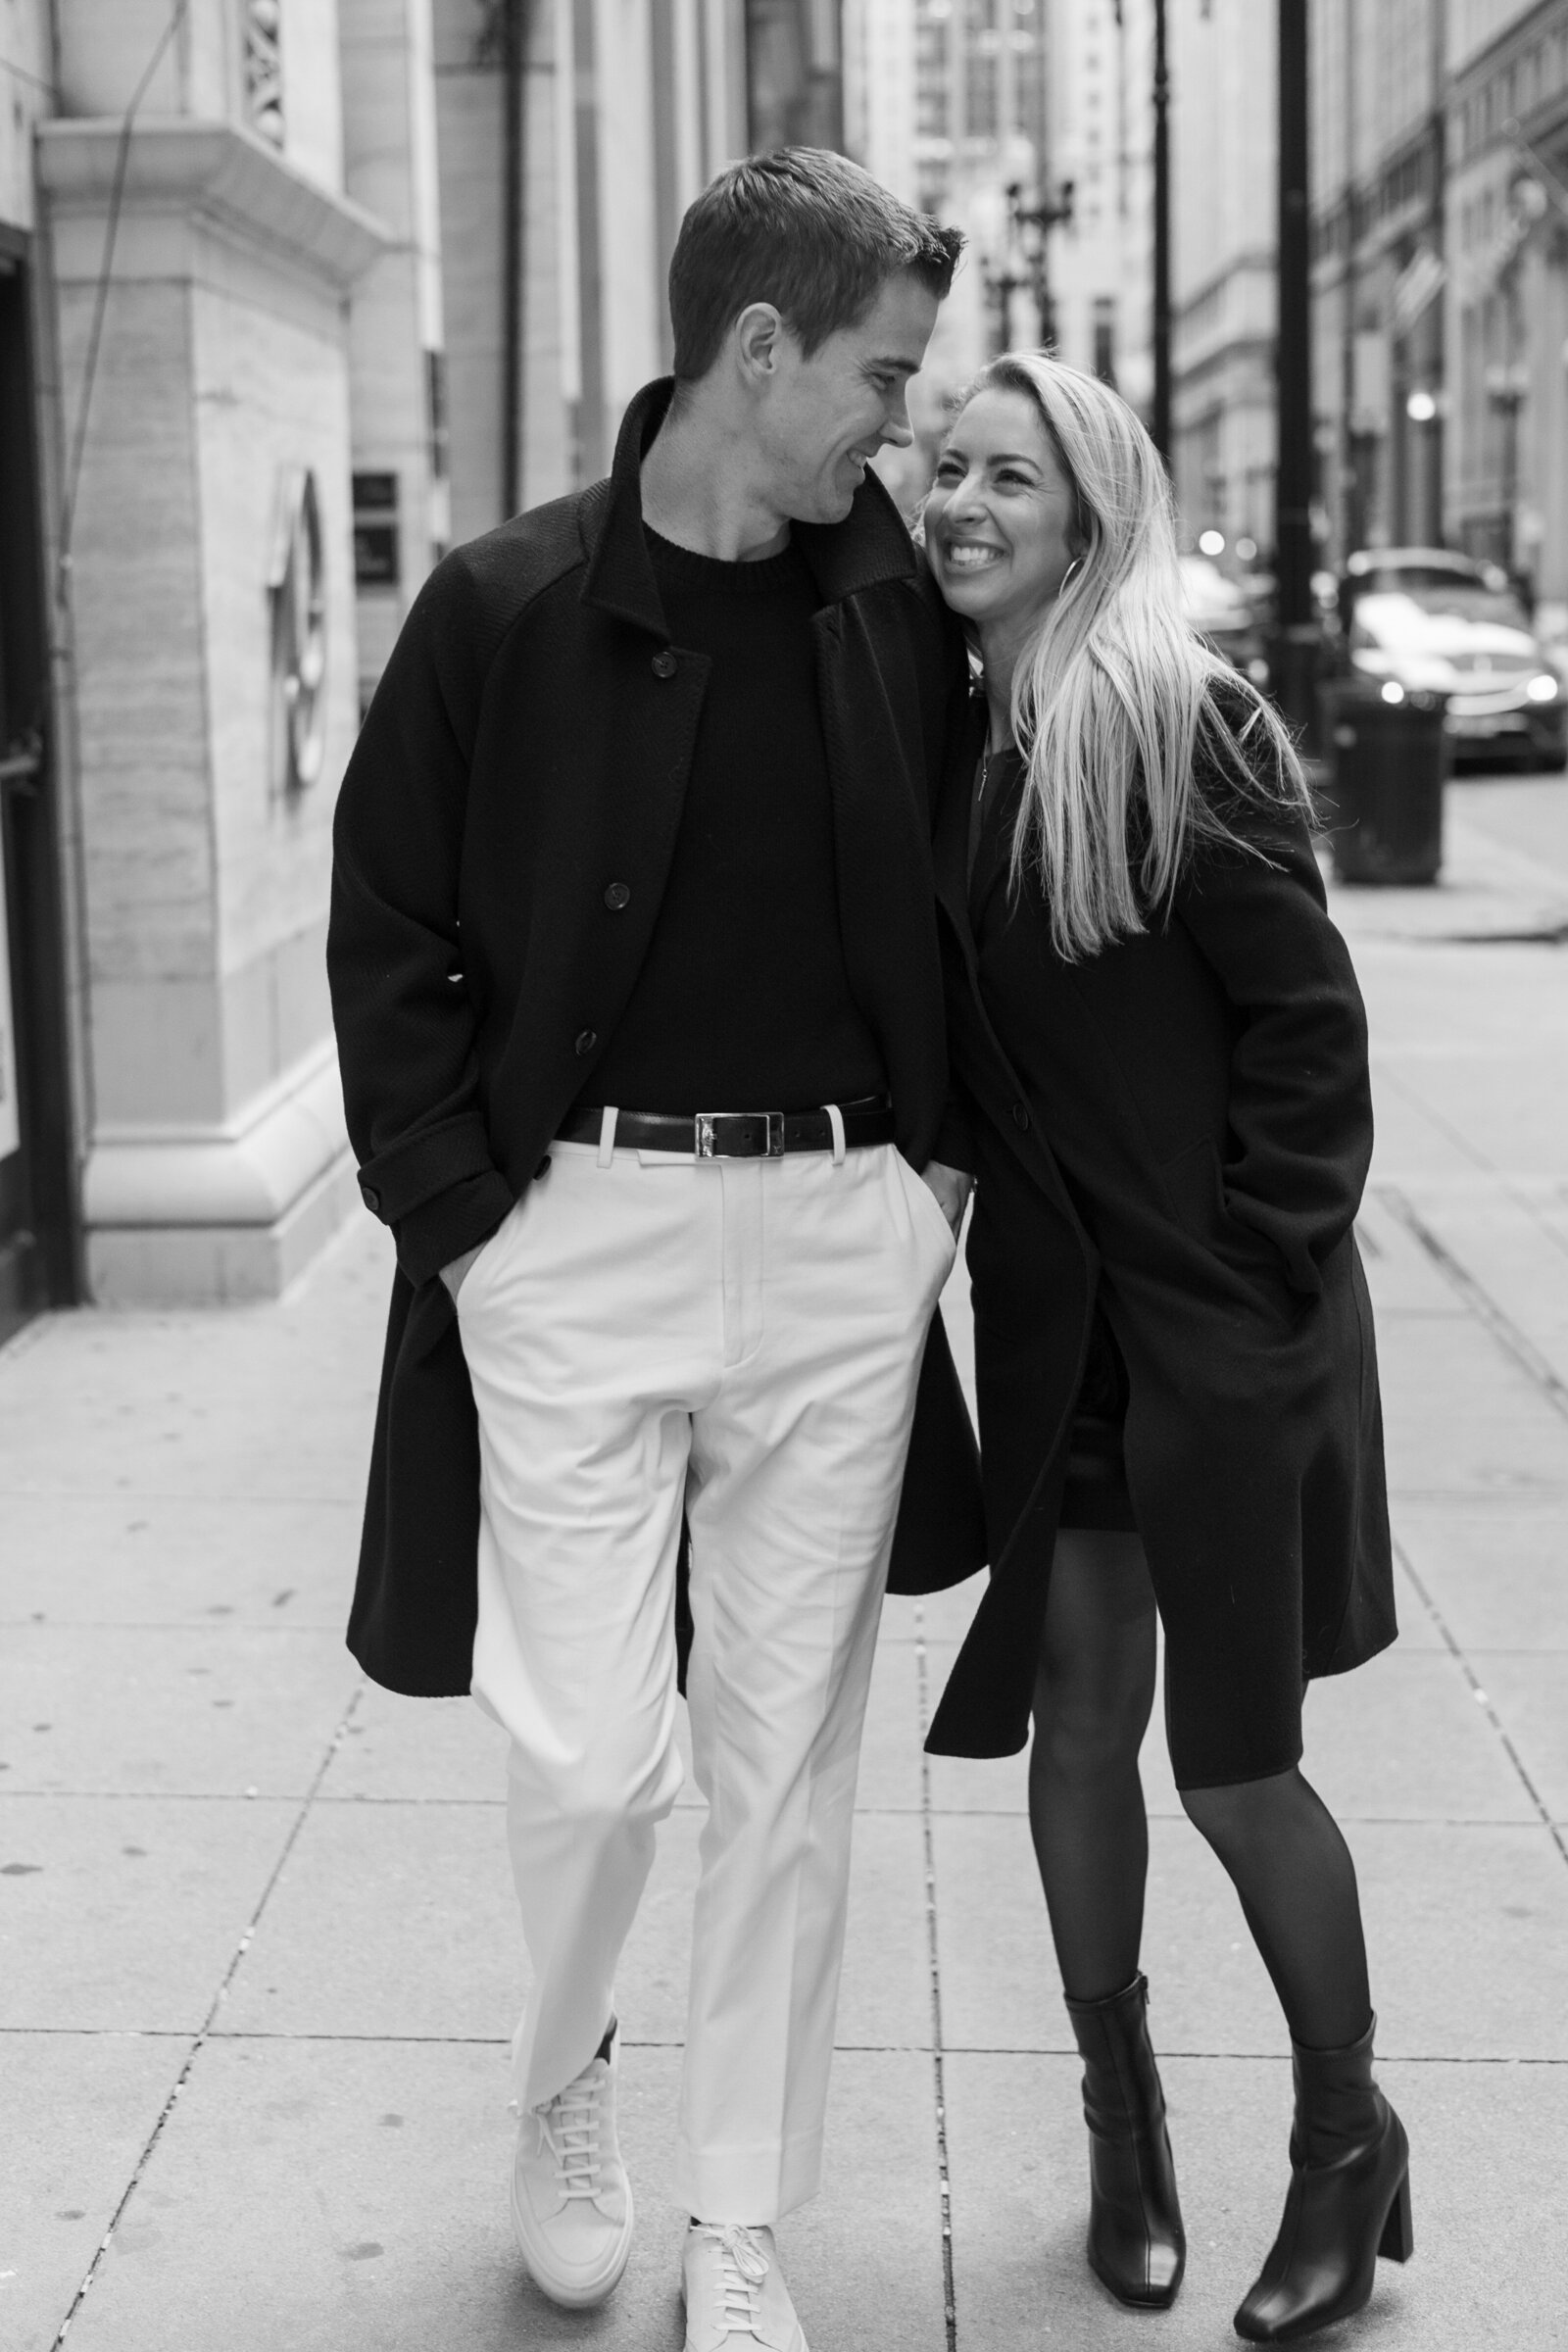 Z Photo and Film - Cody and Silvana's Chicago Engagement Shoot - Chicago, Illinois-79